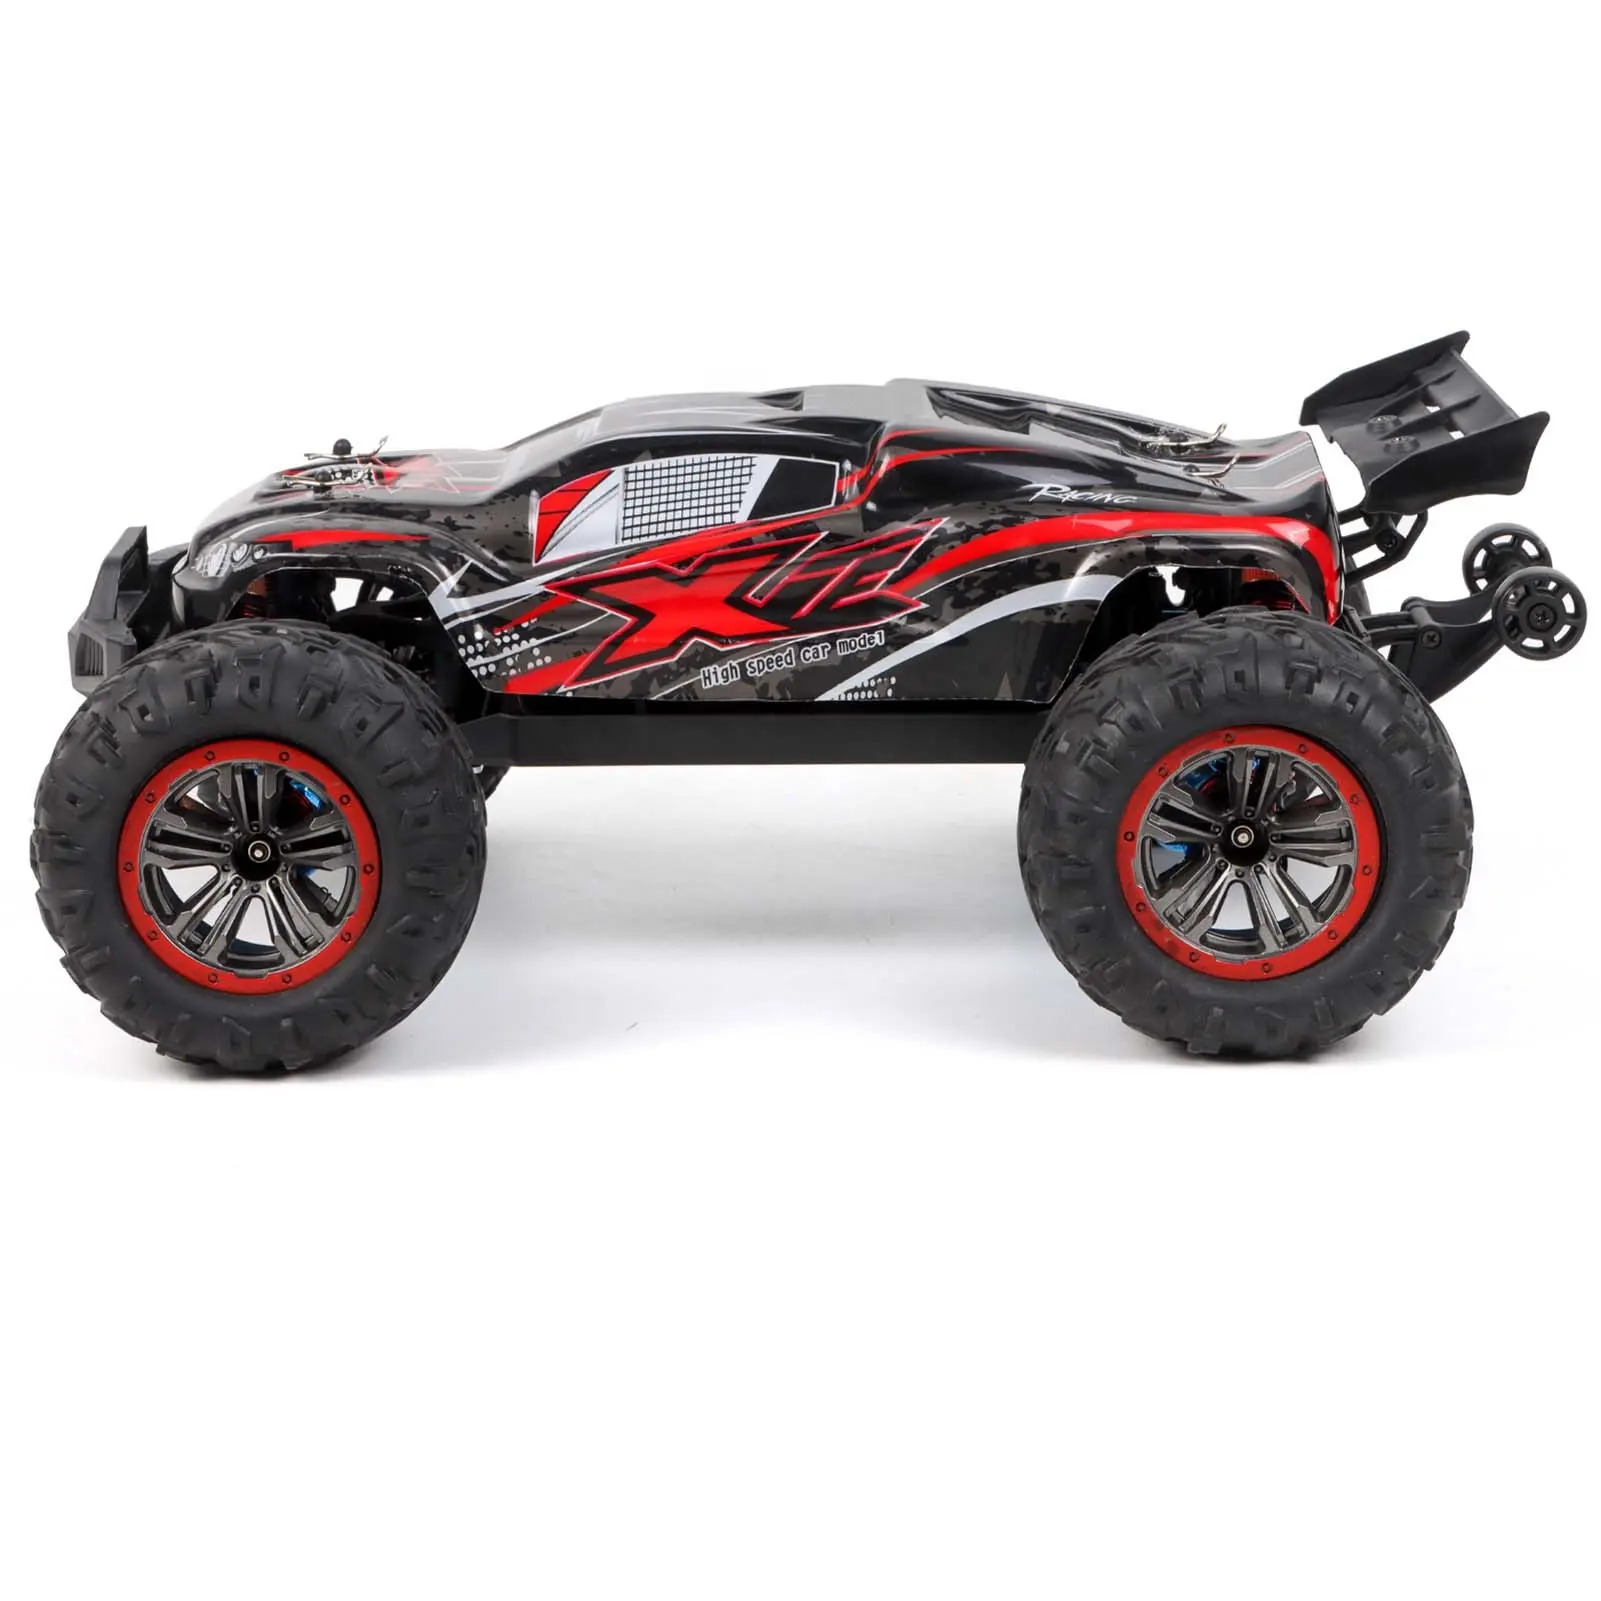 KELEIDI TOYS F14A 1/10 RC Car 2.4GHz 4WD RC Racing Car 70km/h High Speed 200m Control Distance Brushless Motor Off-Road Car